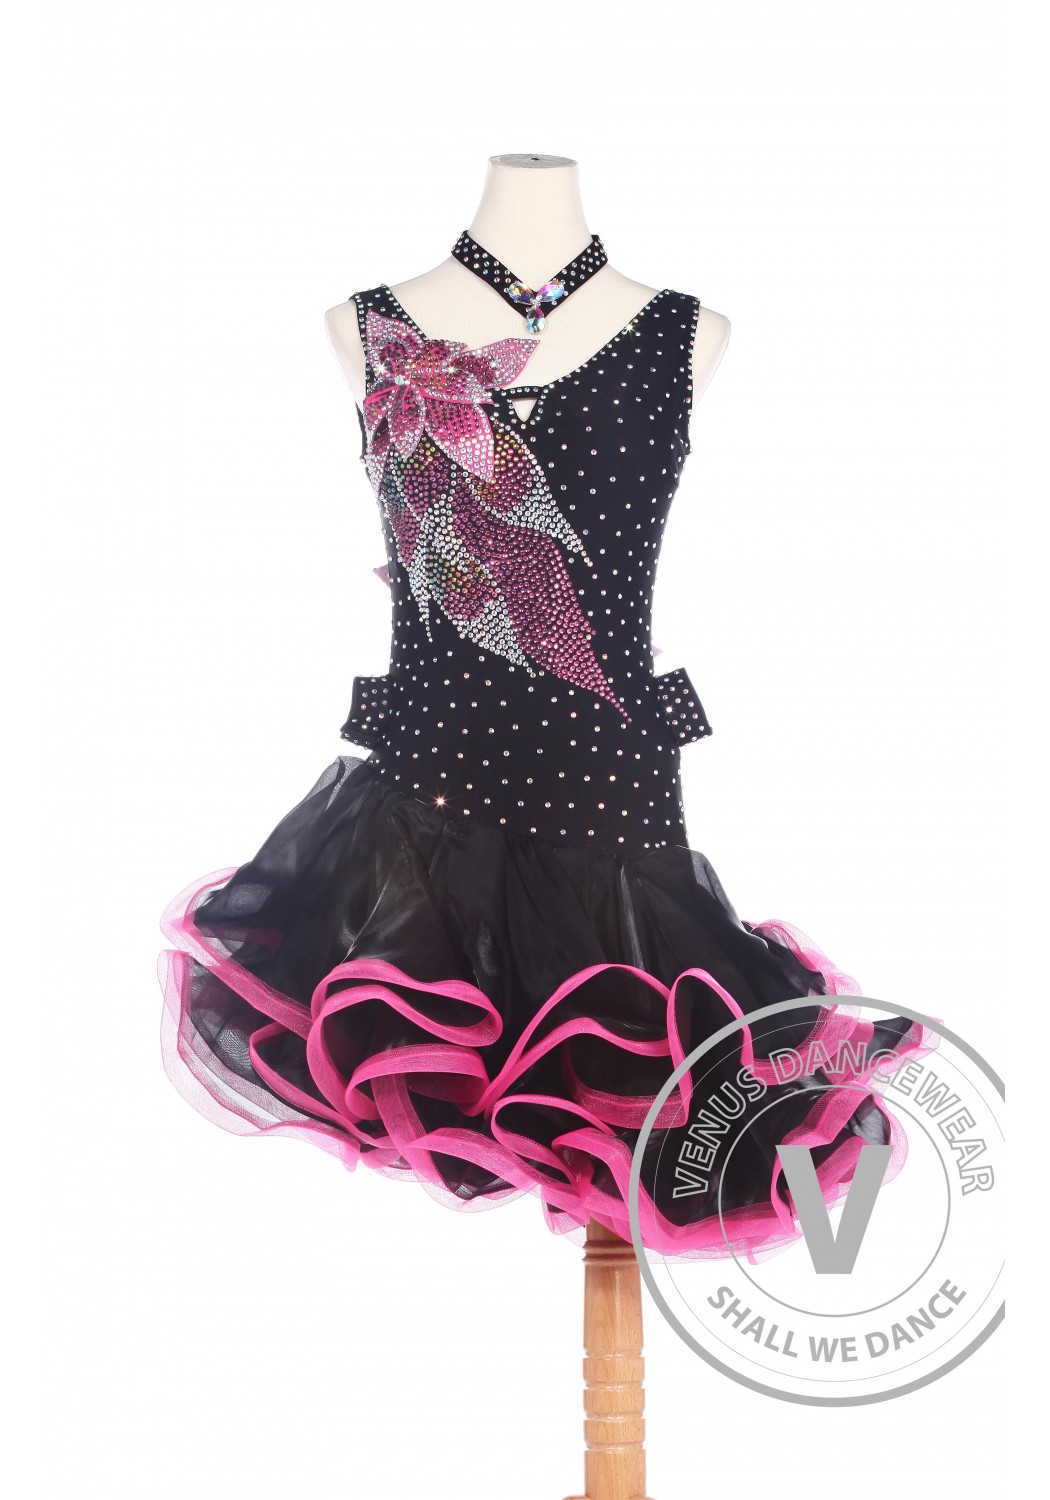 Red and Black American Rhythm Salsa Rumba Competition Dance Dress